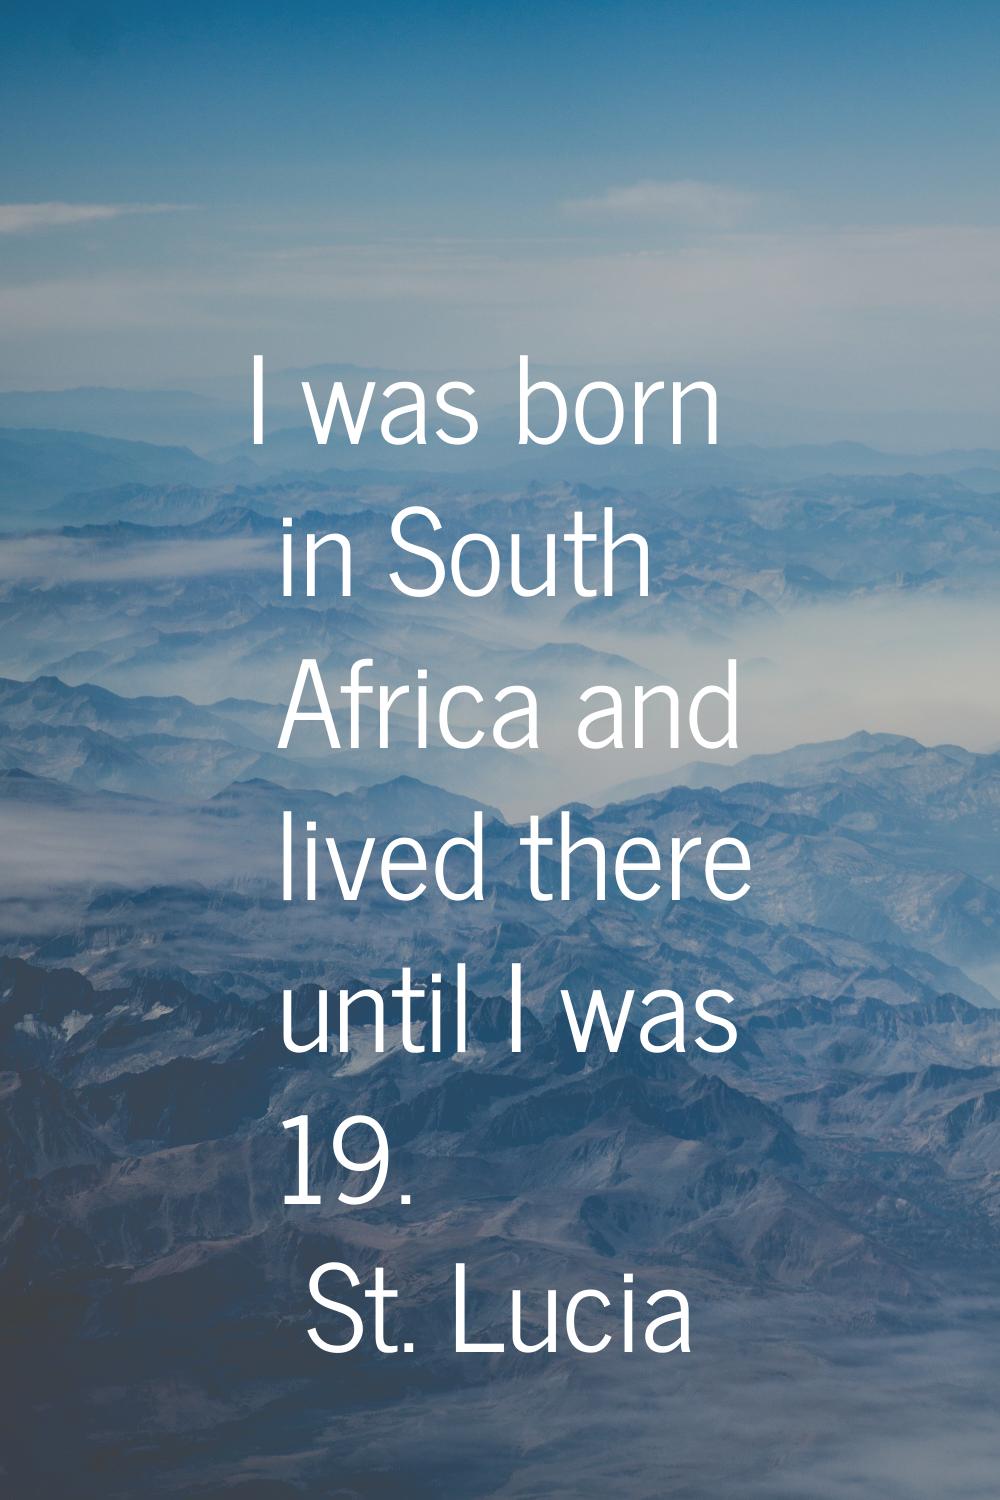 I was born in South Africa and lived there until I was 19.